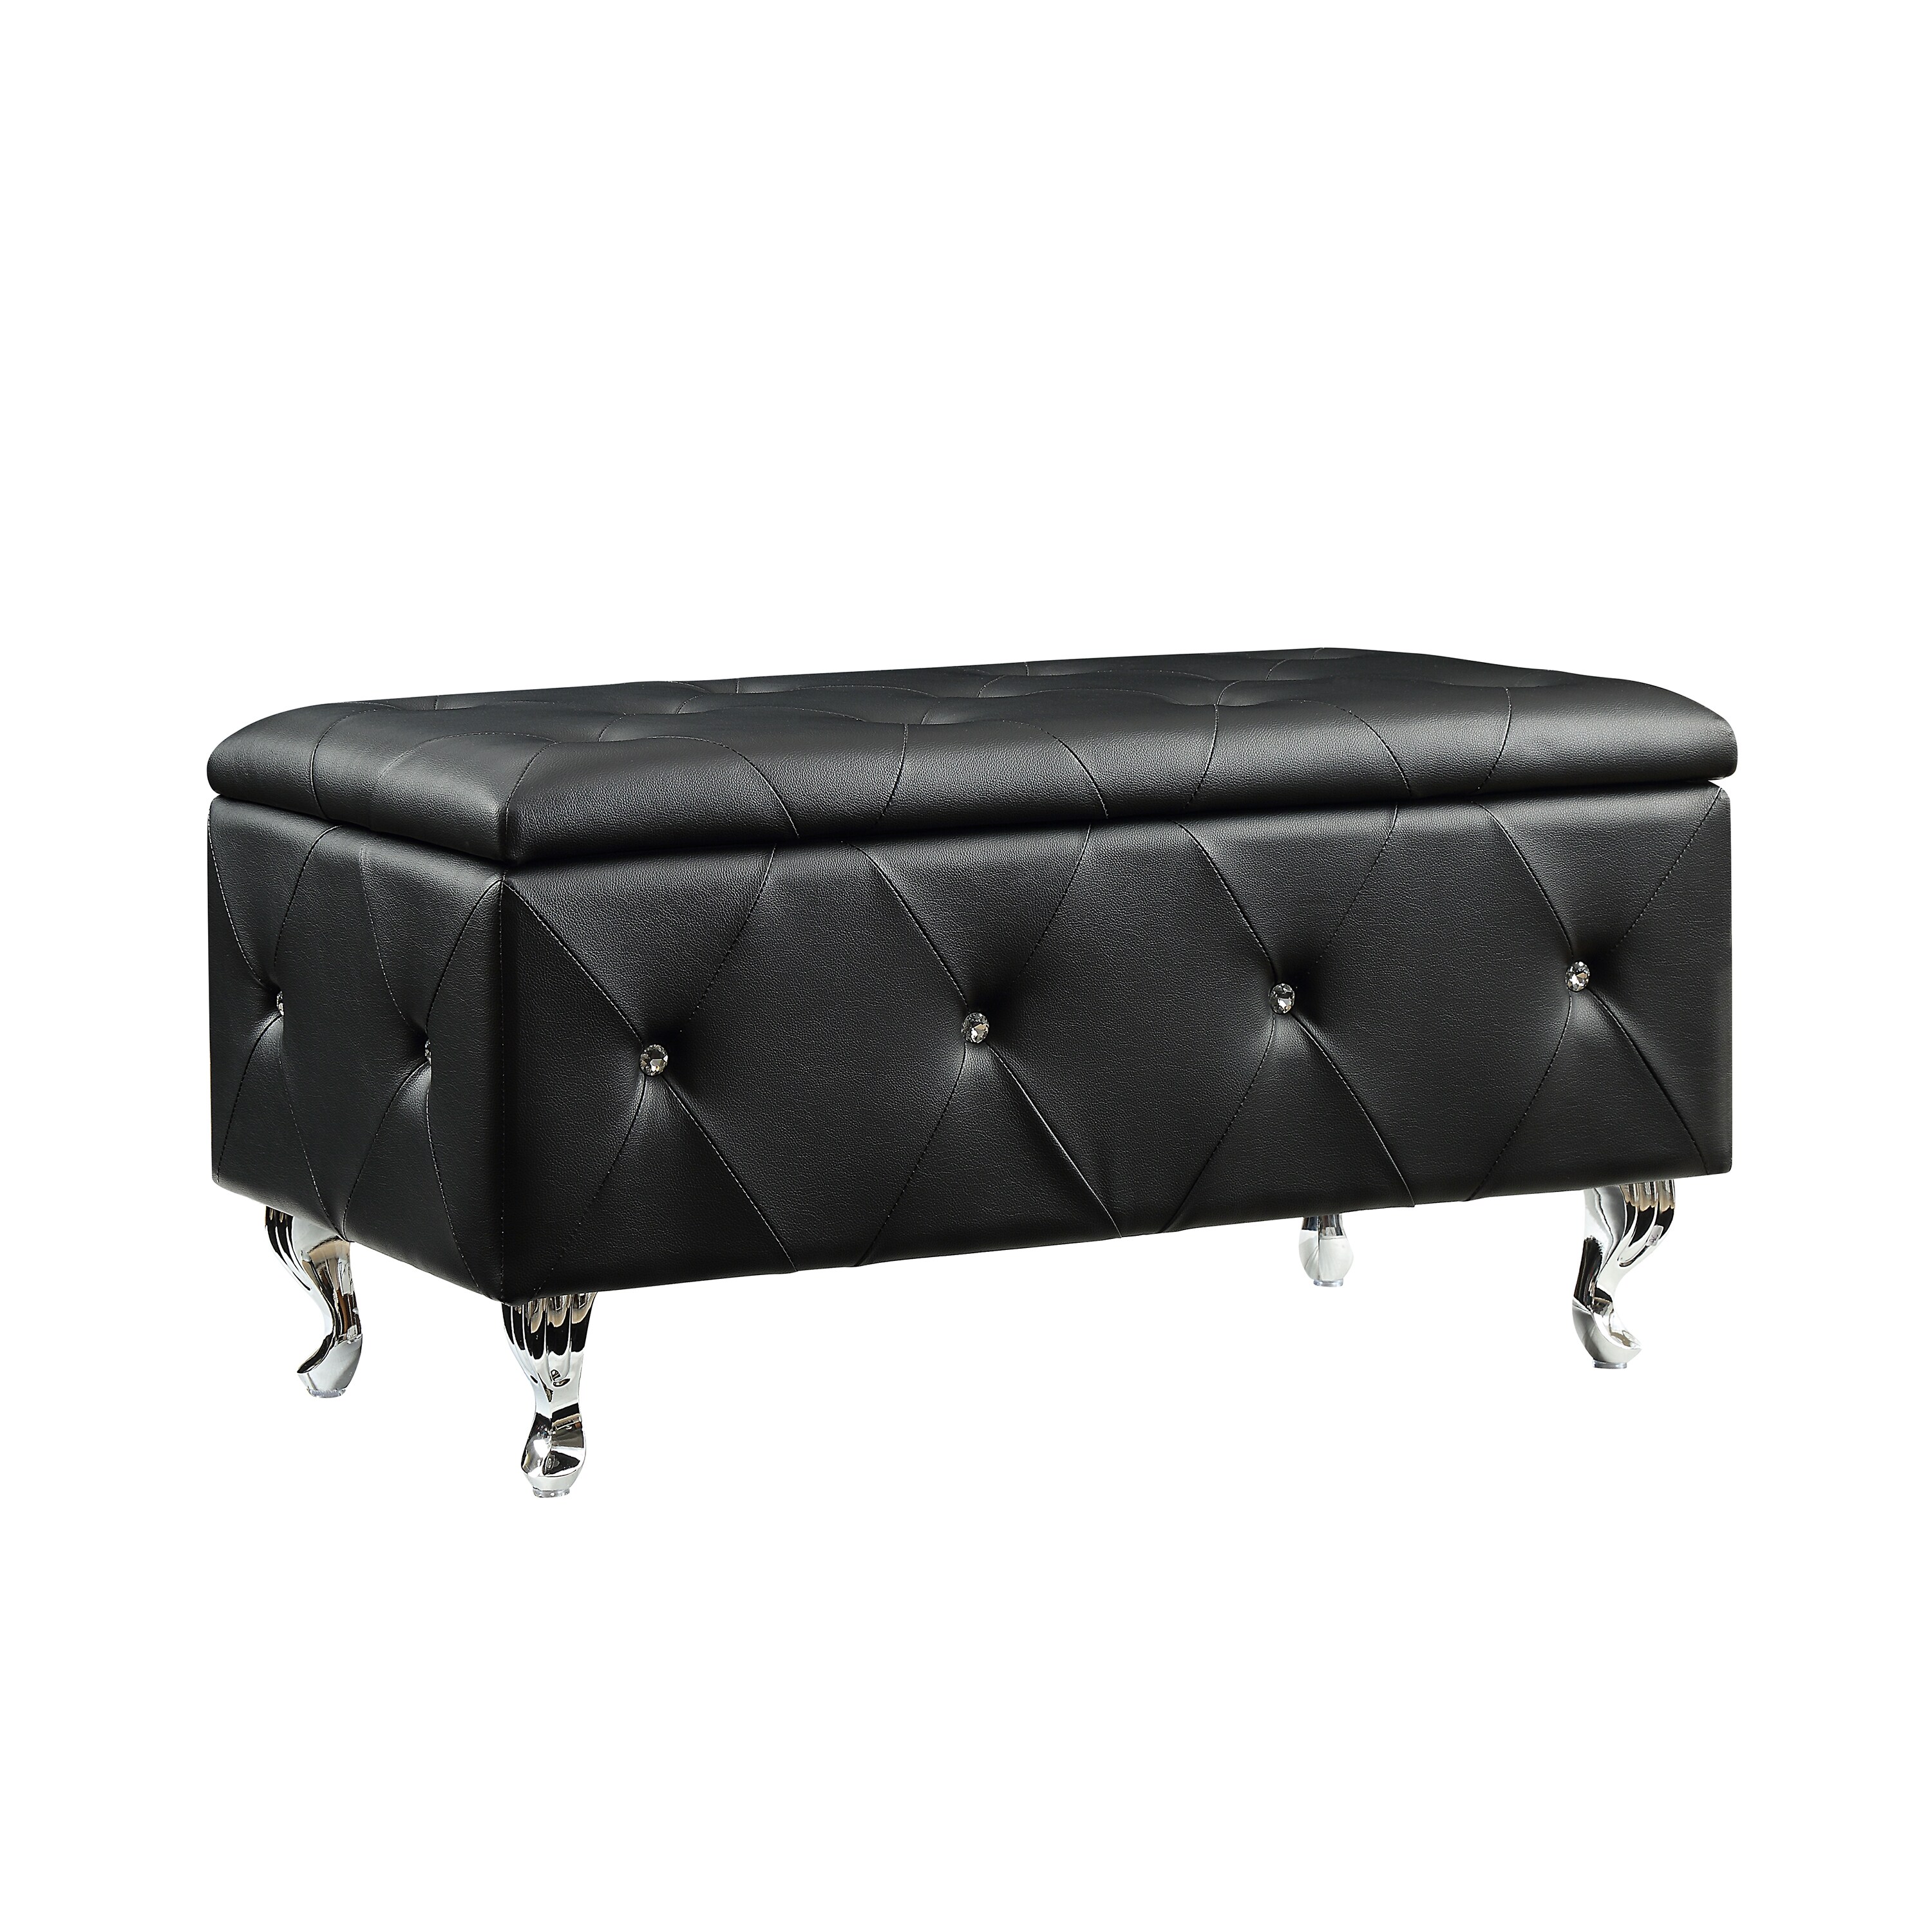 Ac Pacific Modern Black Storage Bench, Contemporary Leather Storage Bench